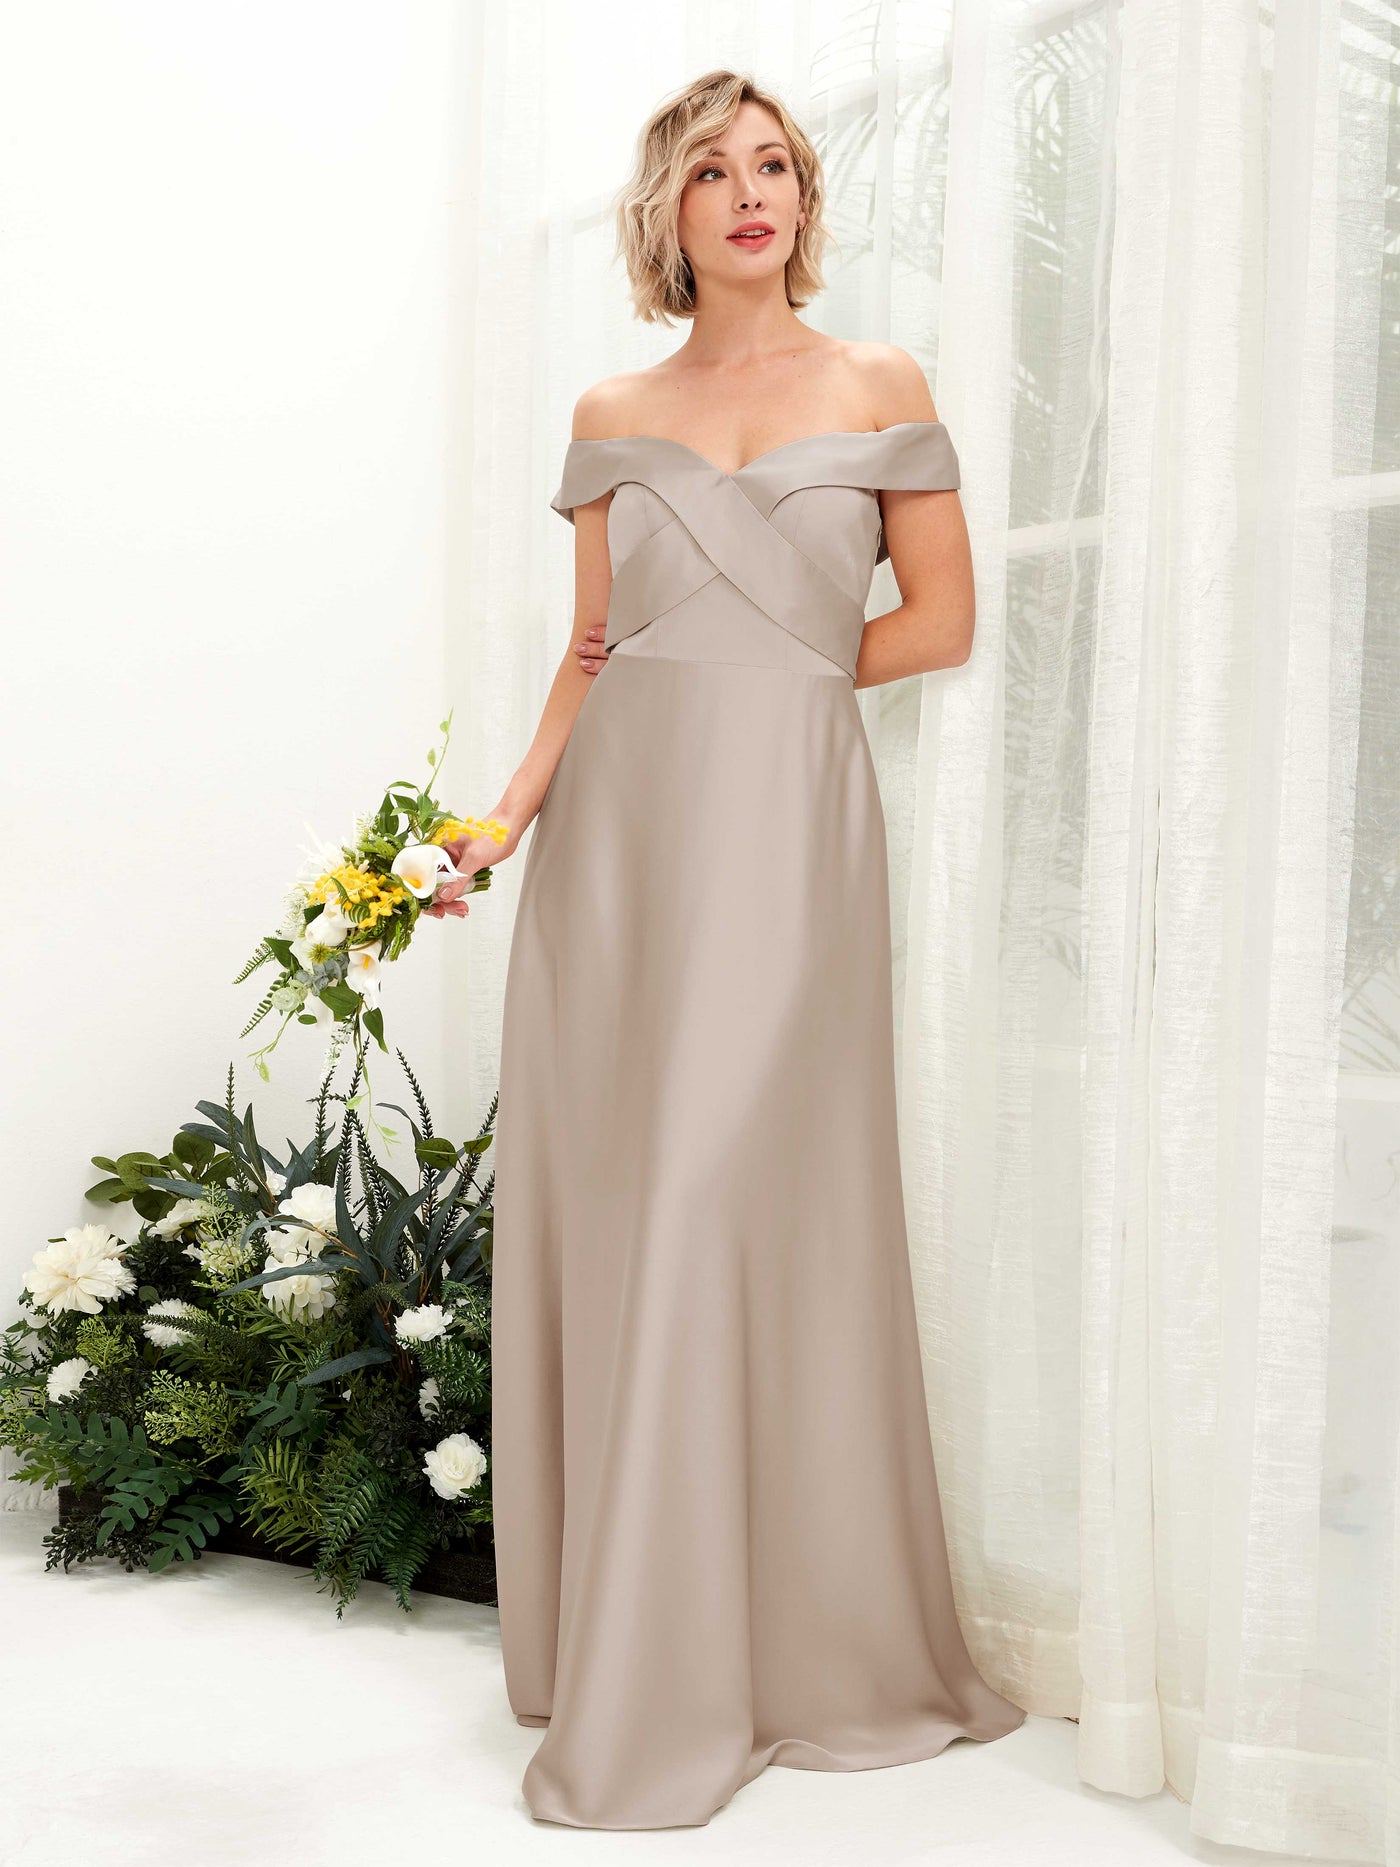 Taupe Bridesmaid Dresses Bridesmaid Dress A-line Satin Off Shoulder Full Length Short Sleeves Wedding Party Dress (80224202)#color_taupe